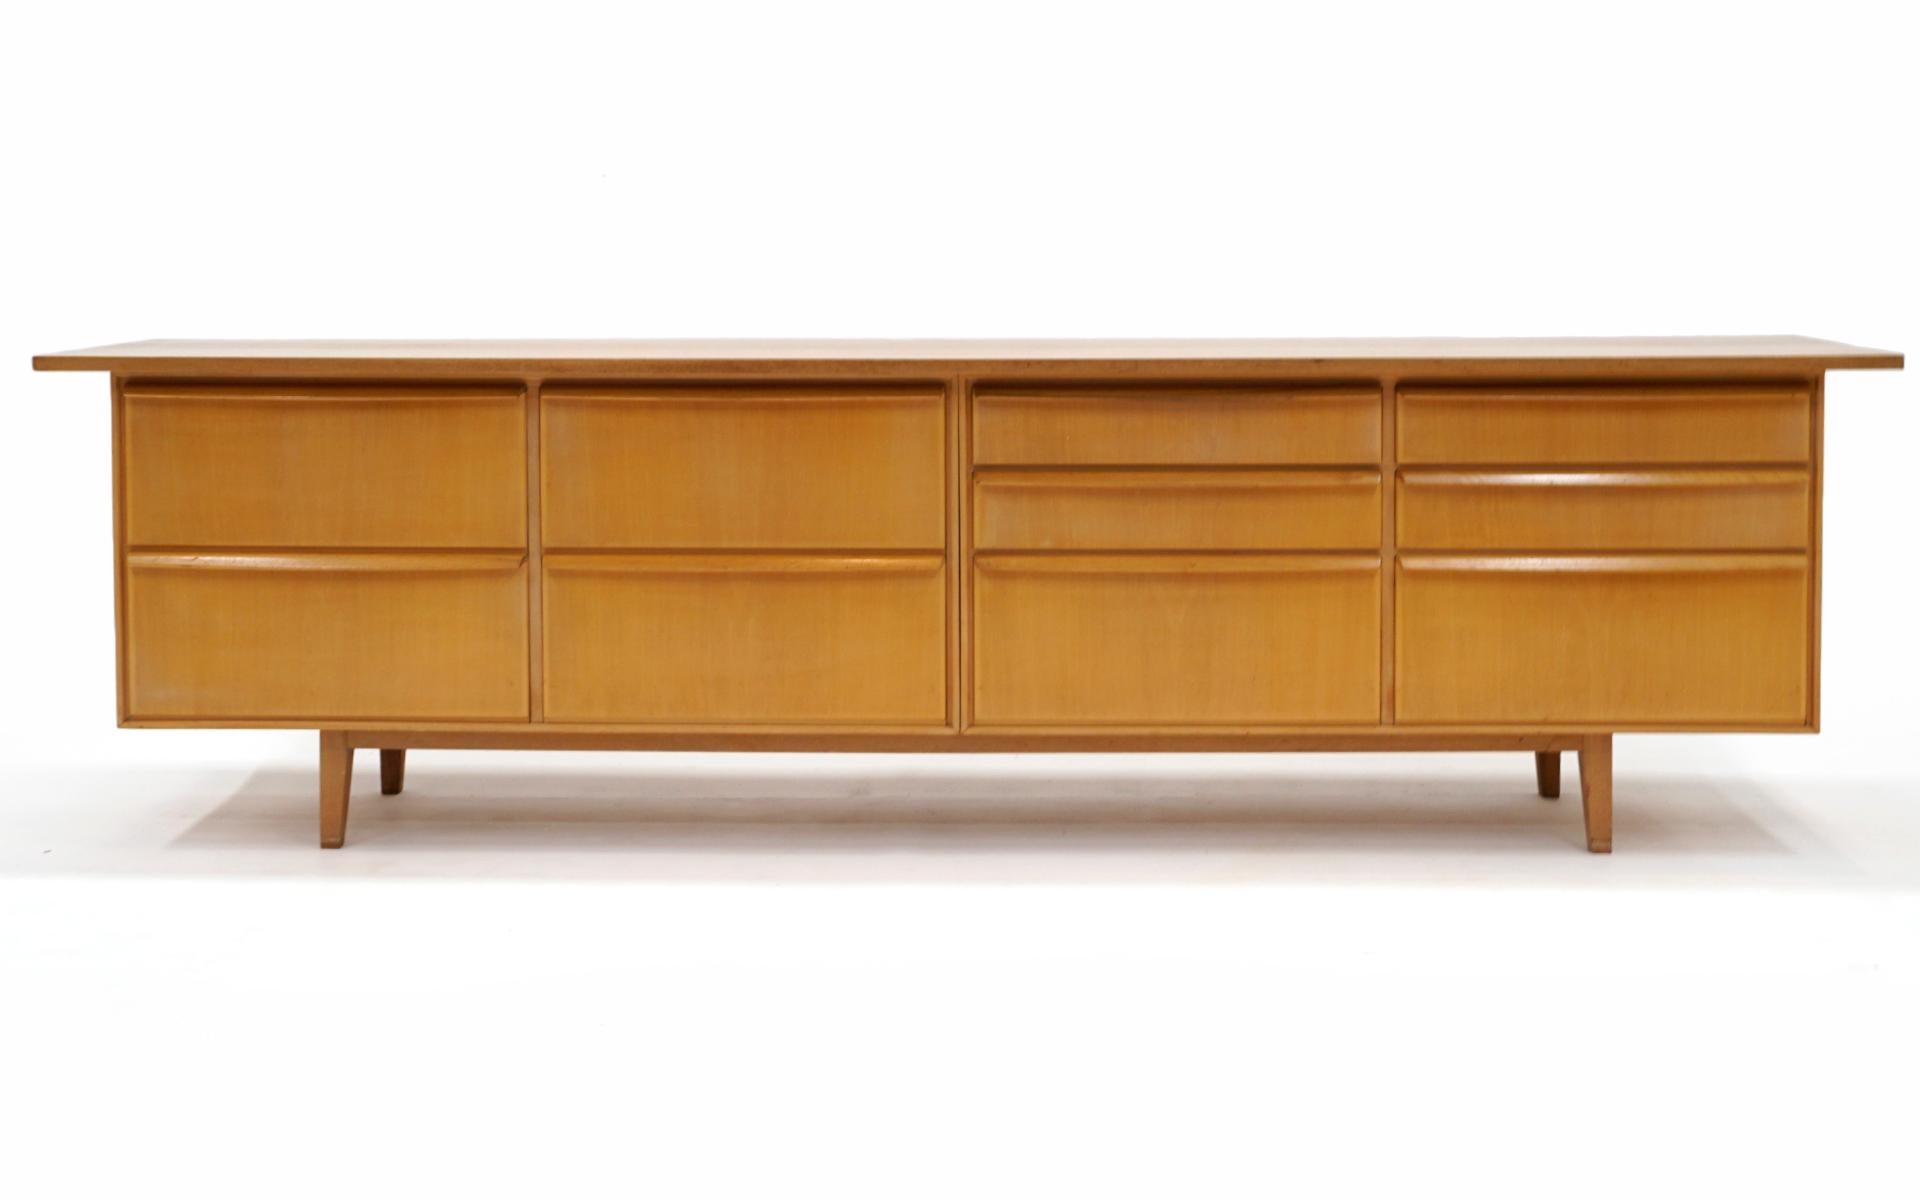 Blond solid birch credenza / storage cabinet in solid birch. Unique design with drawers and drop down doors. The original owners purchased this new in Germany in the 1960s. We don't know the maker but the build is of the highest quality. The front